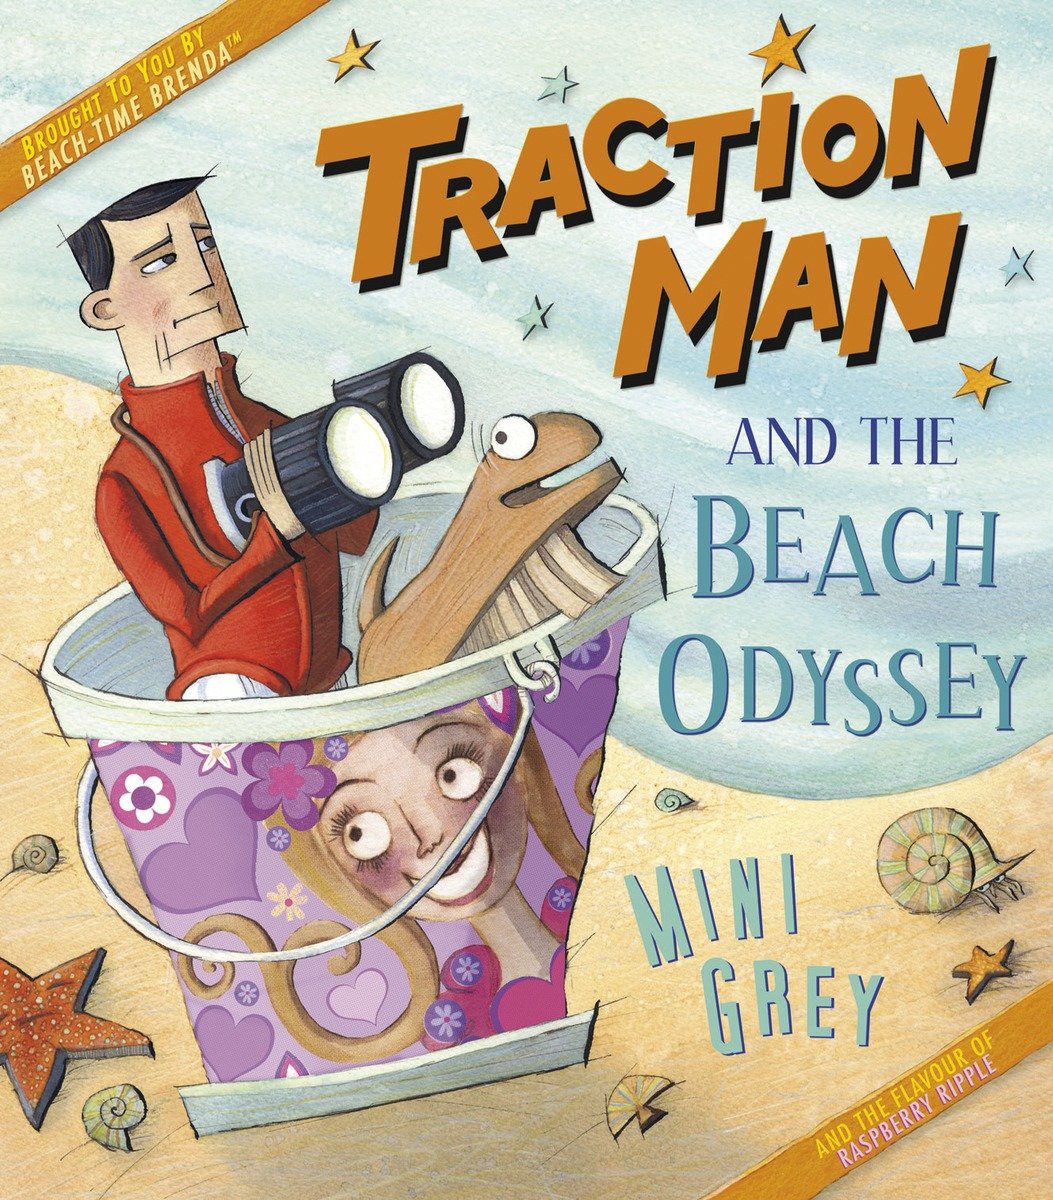 Traction man and the beach odyssey cover image